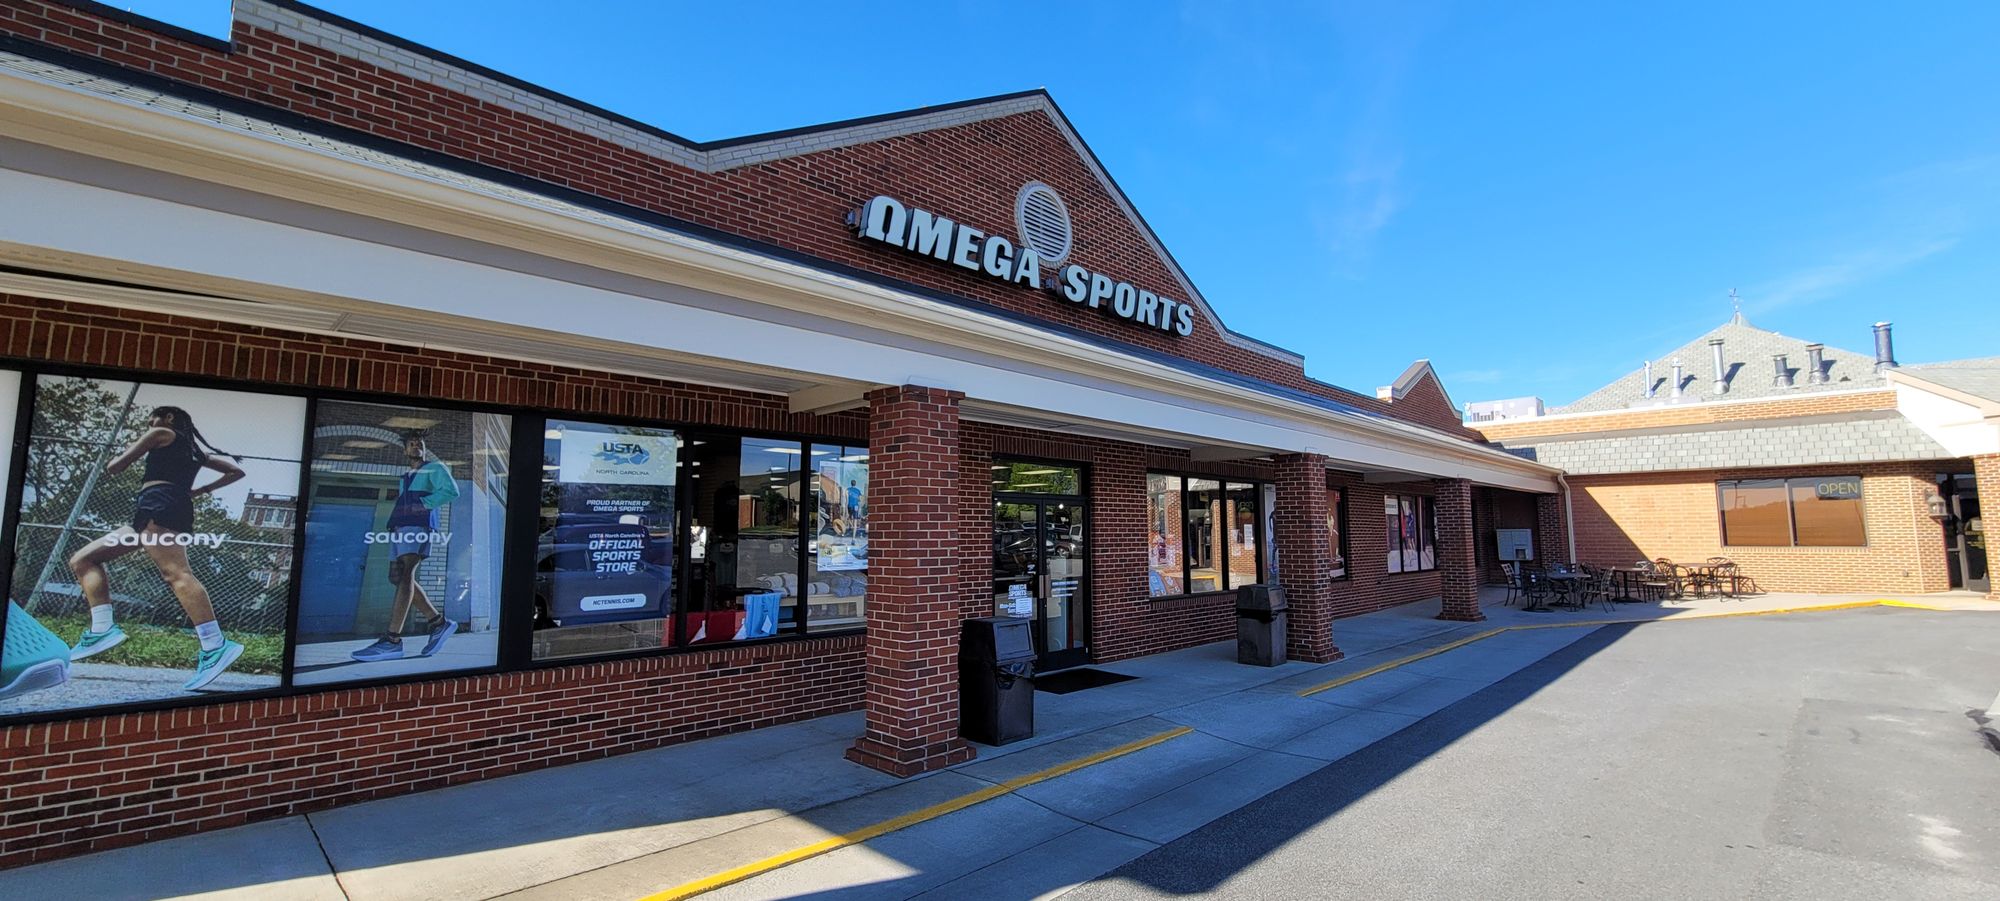 Omega Sports is going out of business